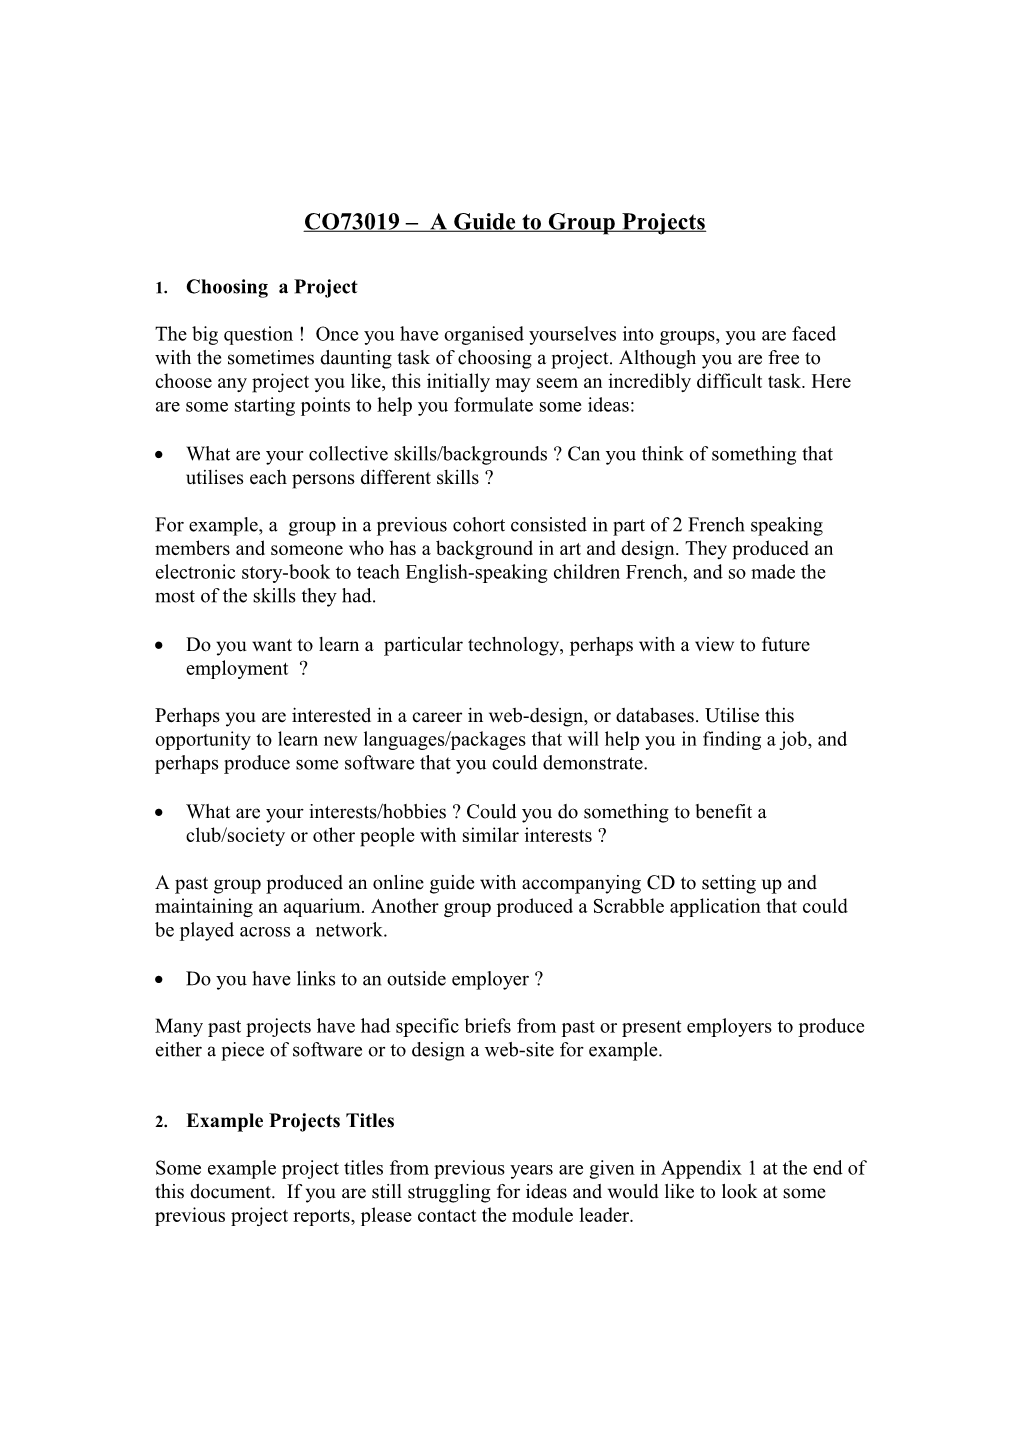 CO73019 a Guide to Group Projects